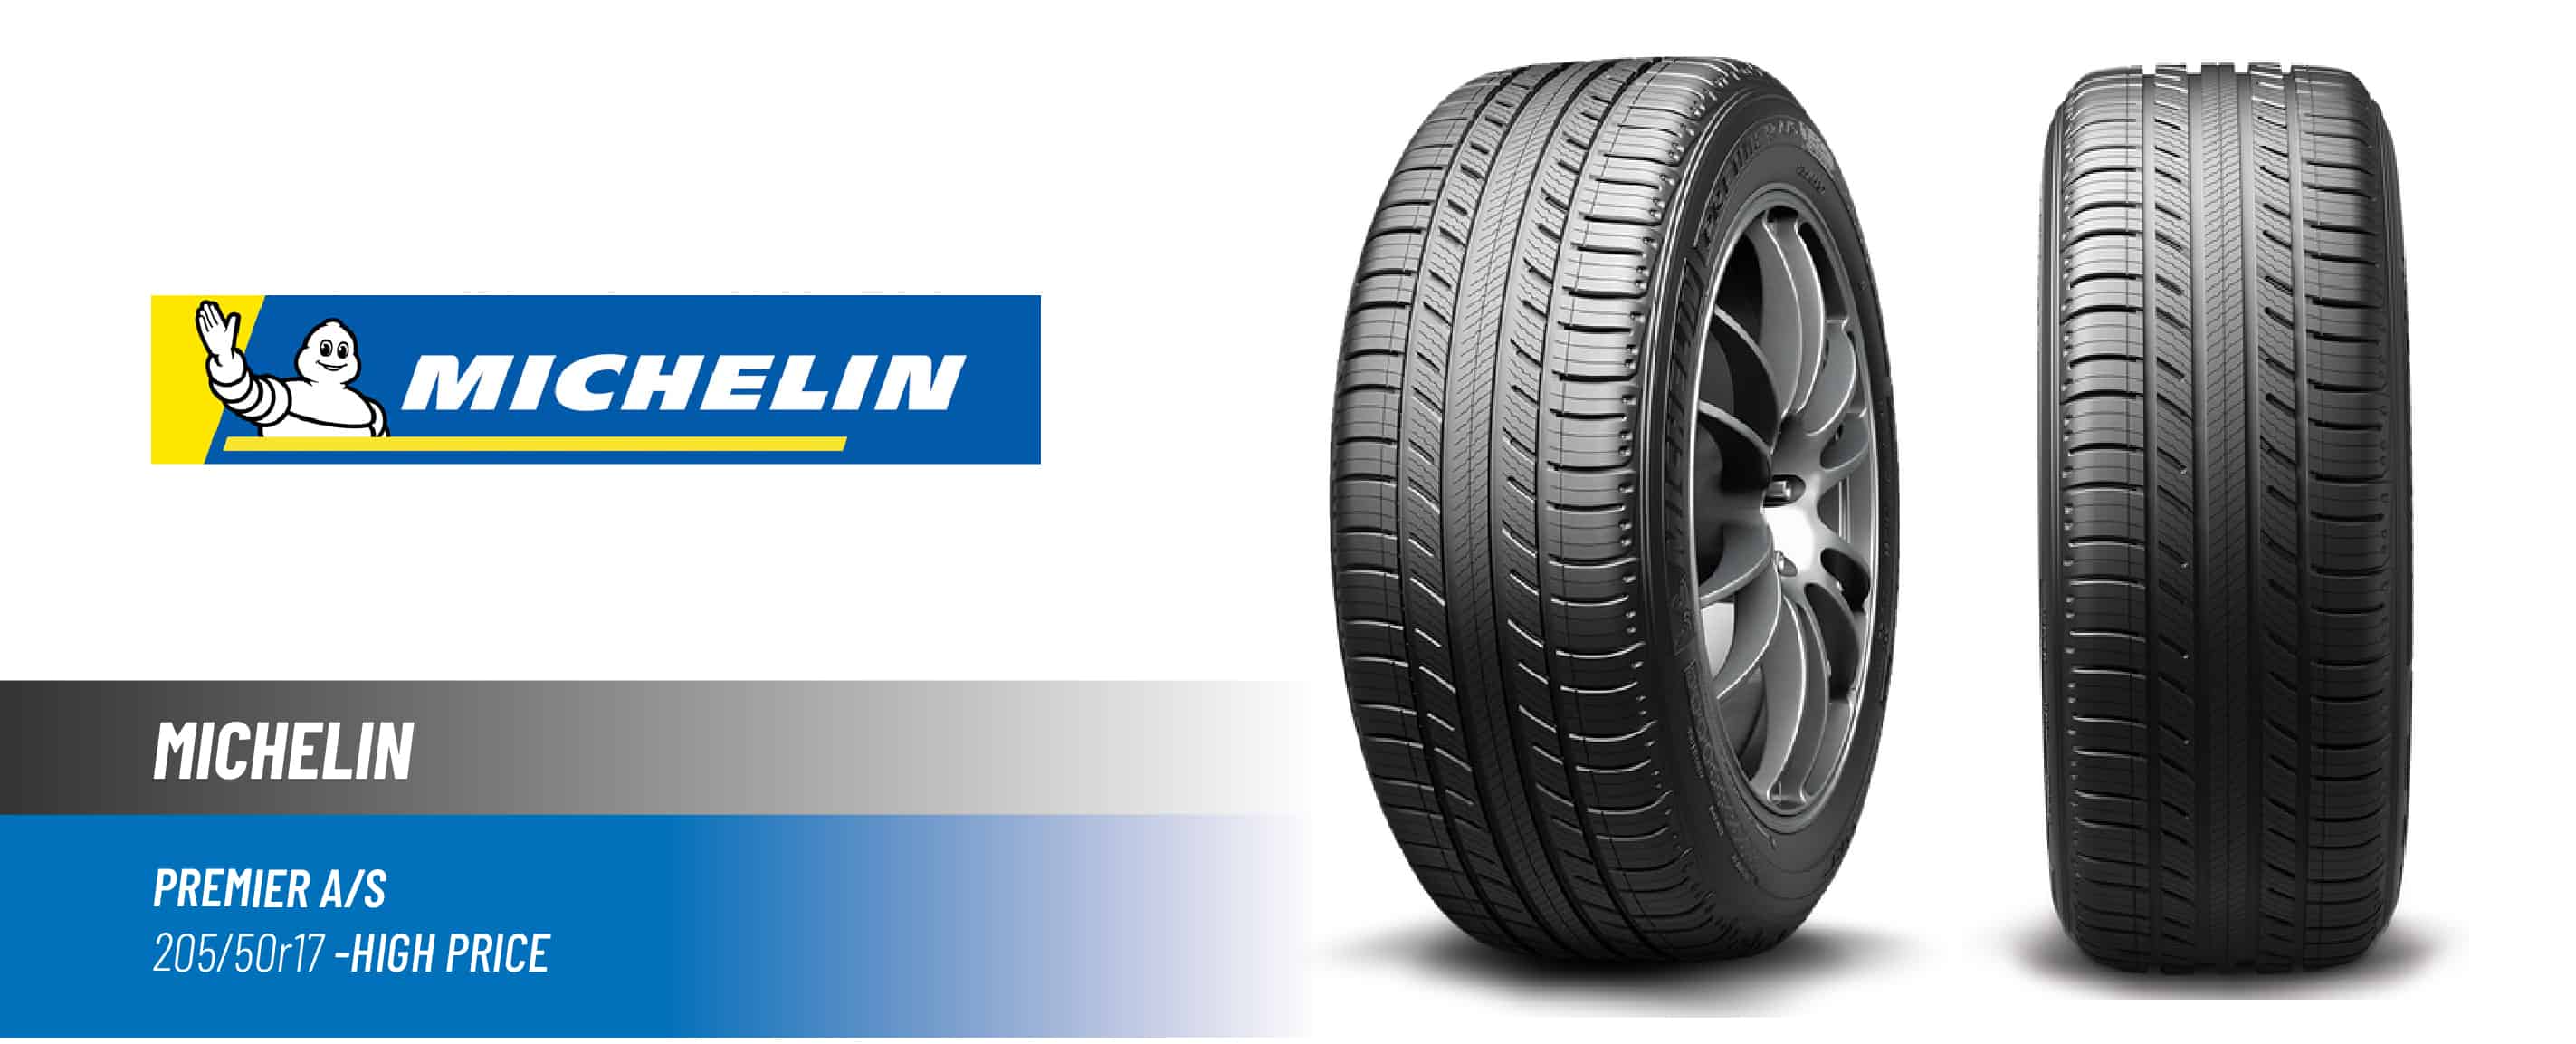 Top#4 High Price: Michelin Premier A/S –the best 205/50r17